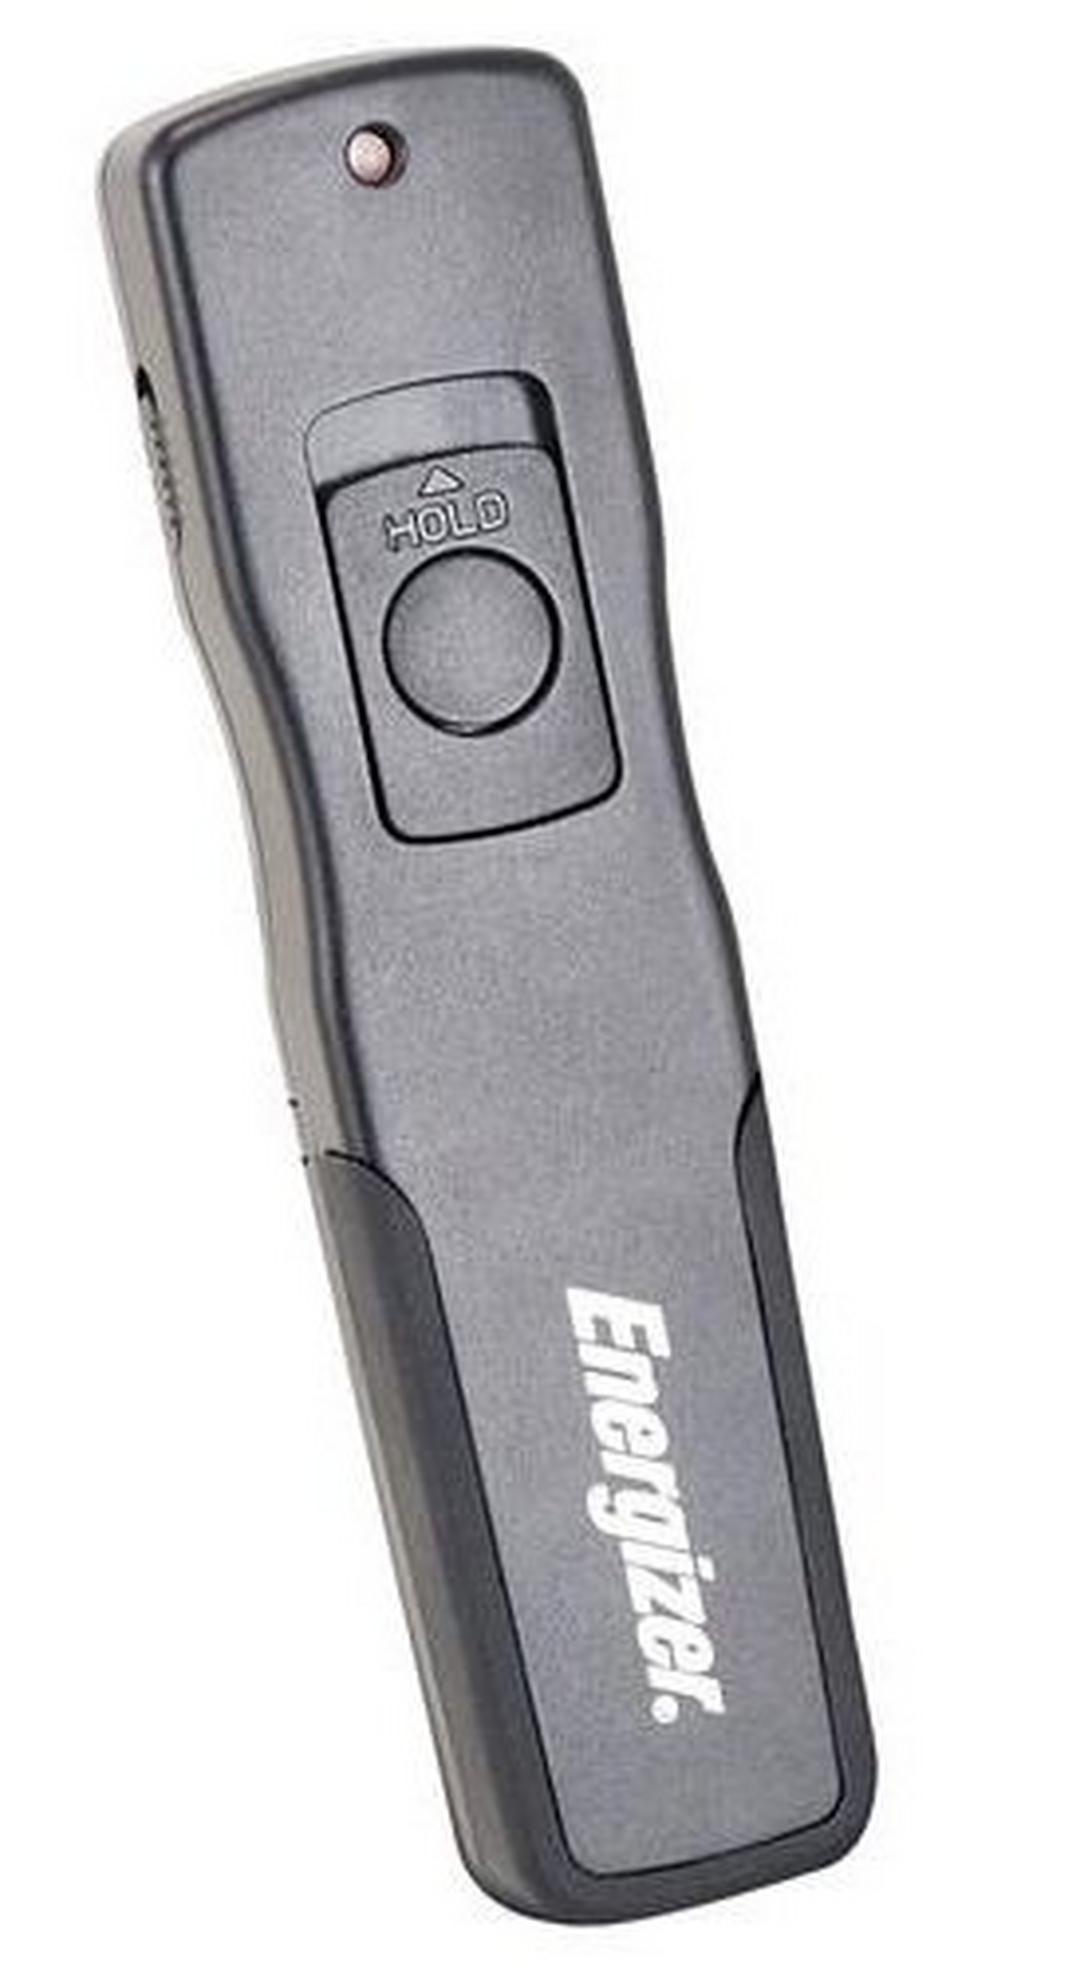 Energizer Wireless Remote with Shutter Trigger - ENS-WUNI